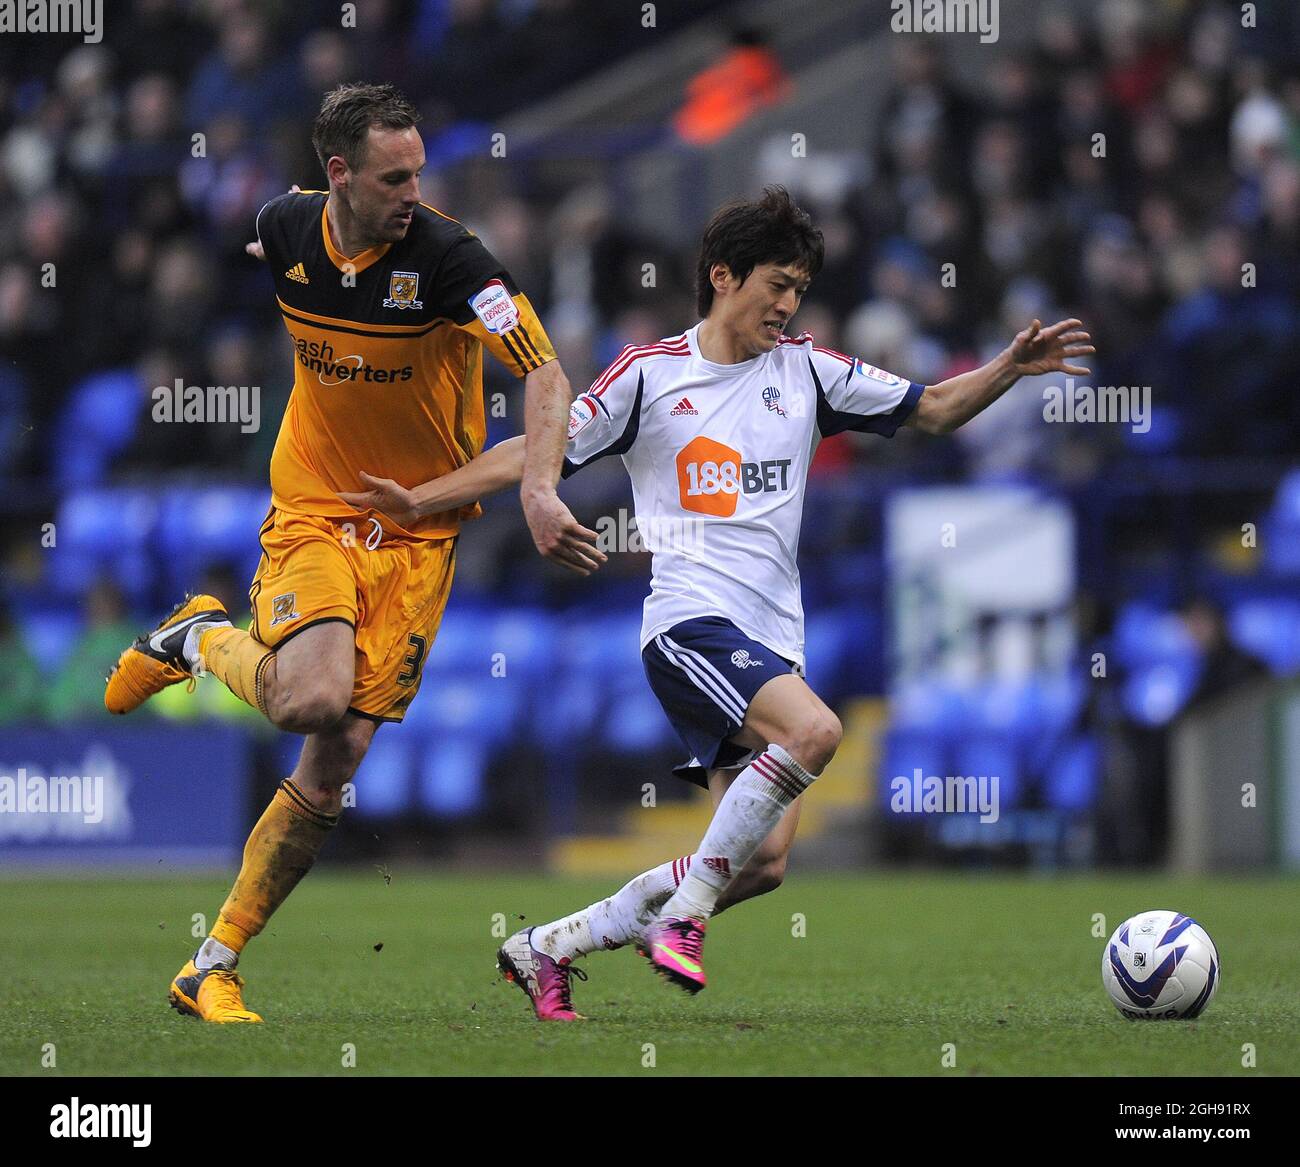 David Meyler of Hull City tussles with Lee Chung-Yong of Bolton Wanderers during the npower Football League Championship match between Bolton Wanderers and Hull City at Reebok Stadium in Bolton, UK on Feb. 23, 2013. Stock Photo